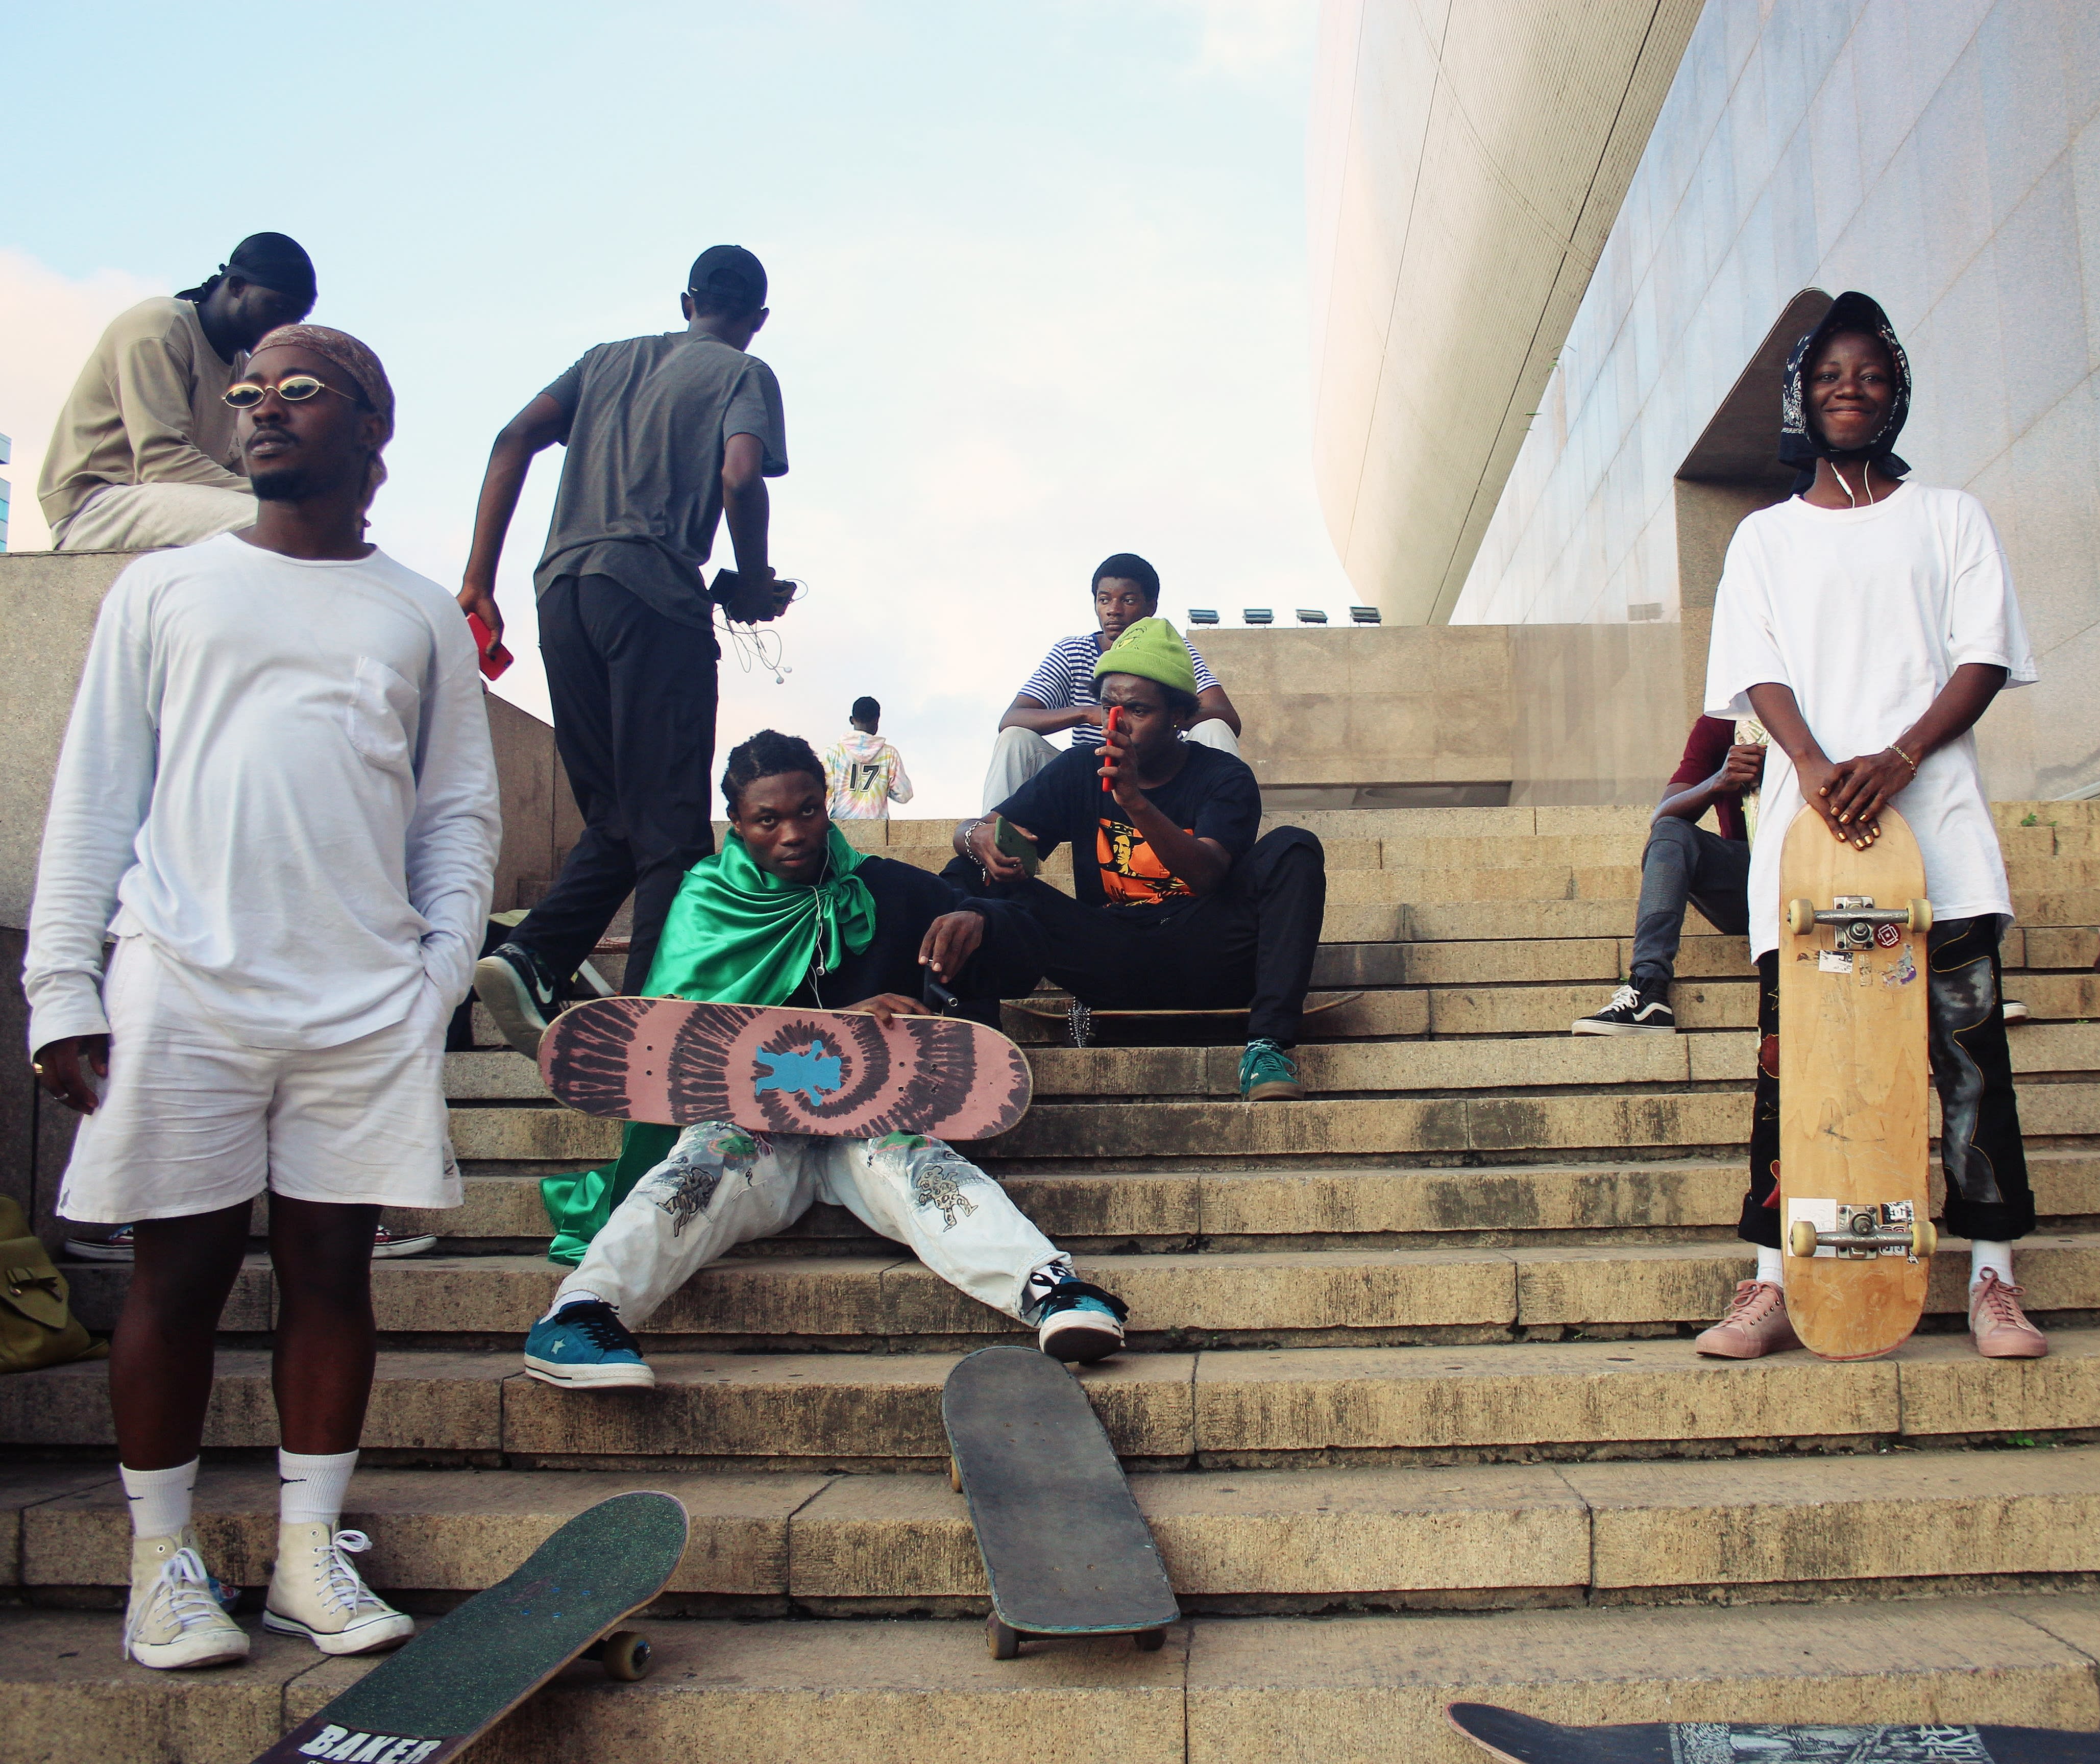 Virgil Abloh and Daily Paper Link Up to Help Bring New Skate Park to Ghana